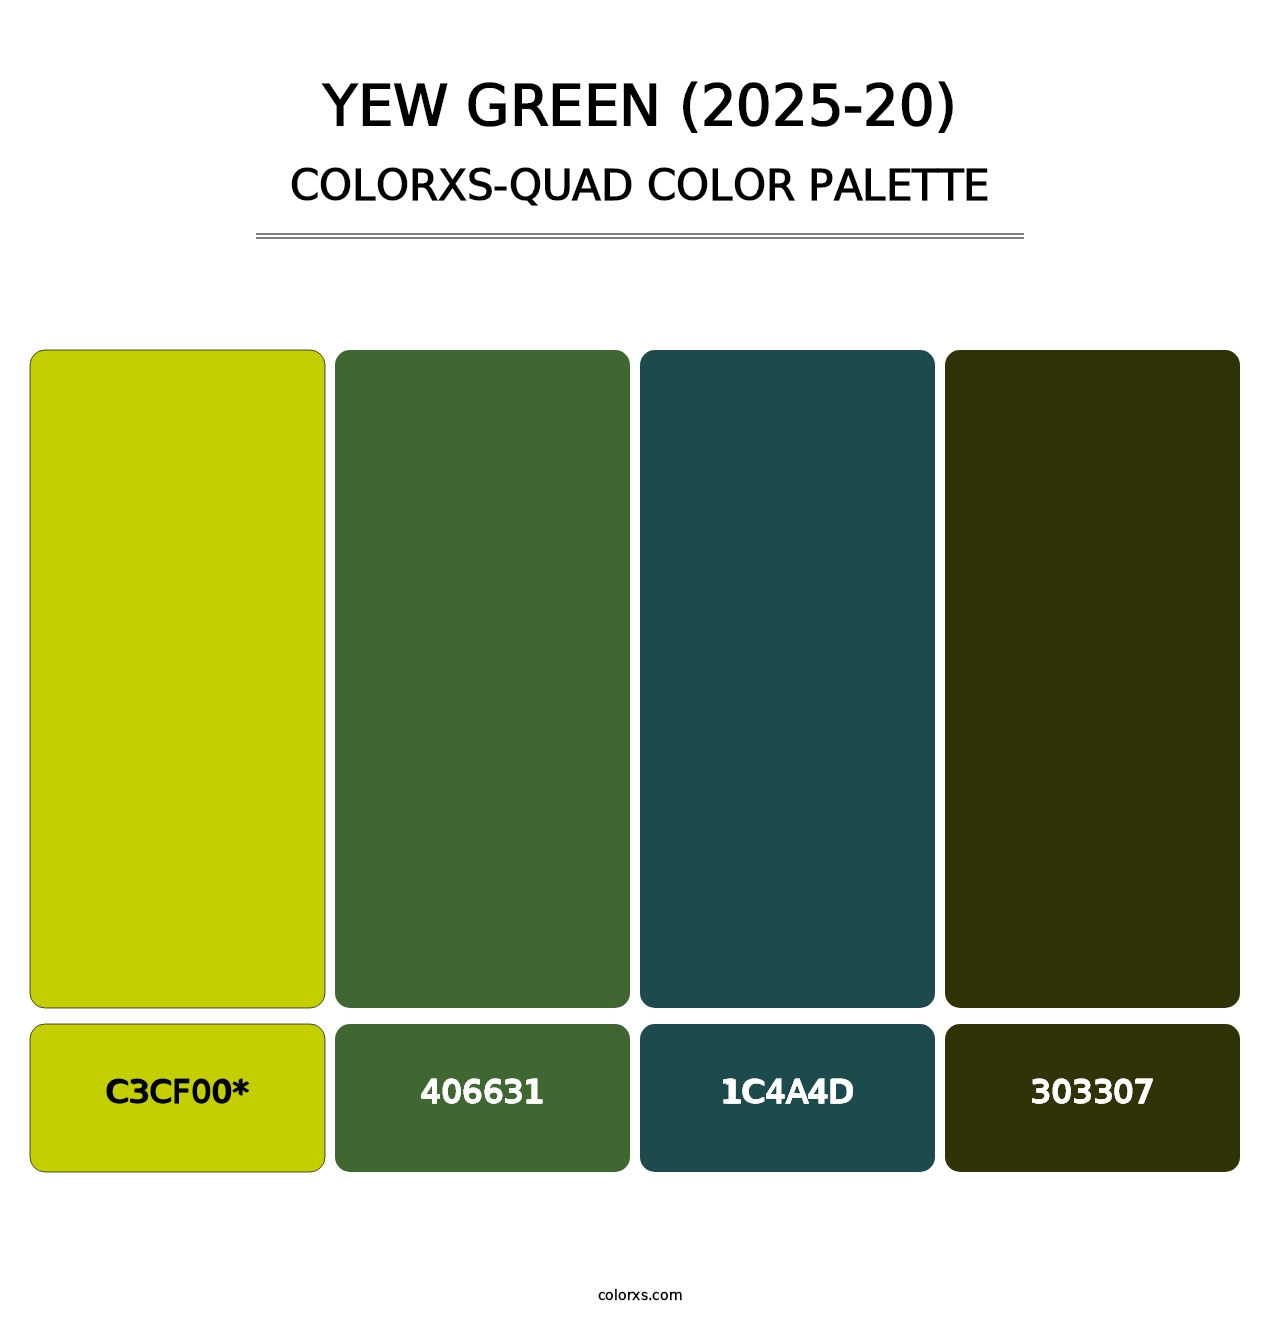 Yew Green (2025-20) - Colorxs Quad Palette